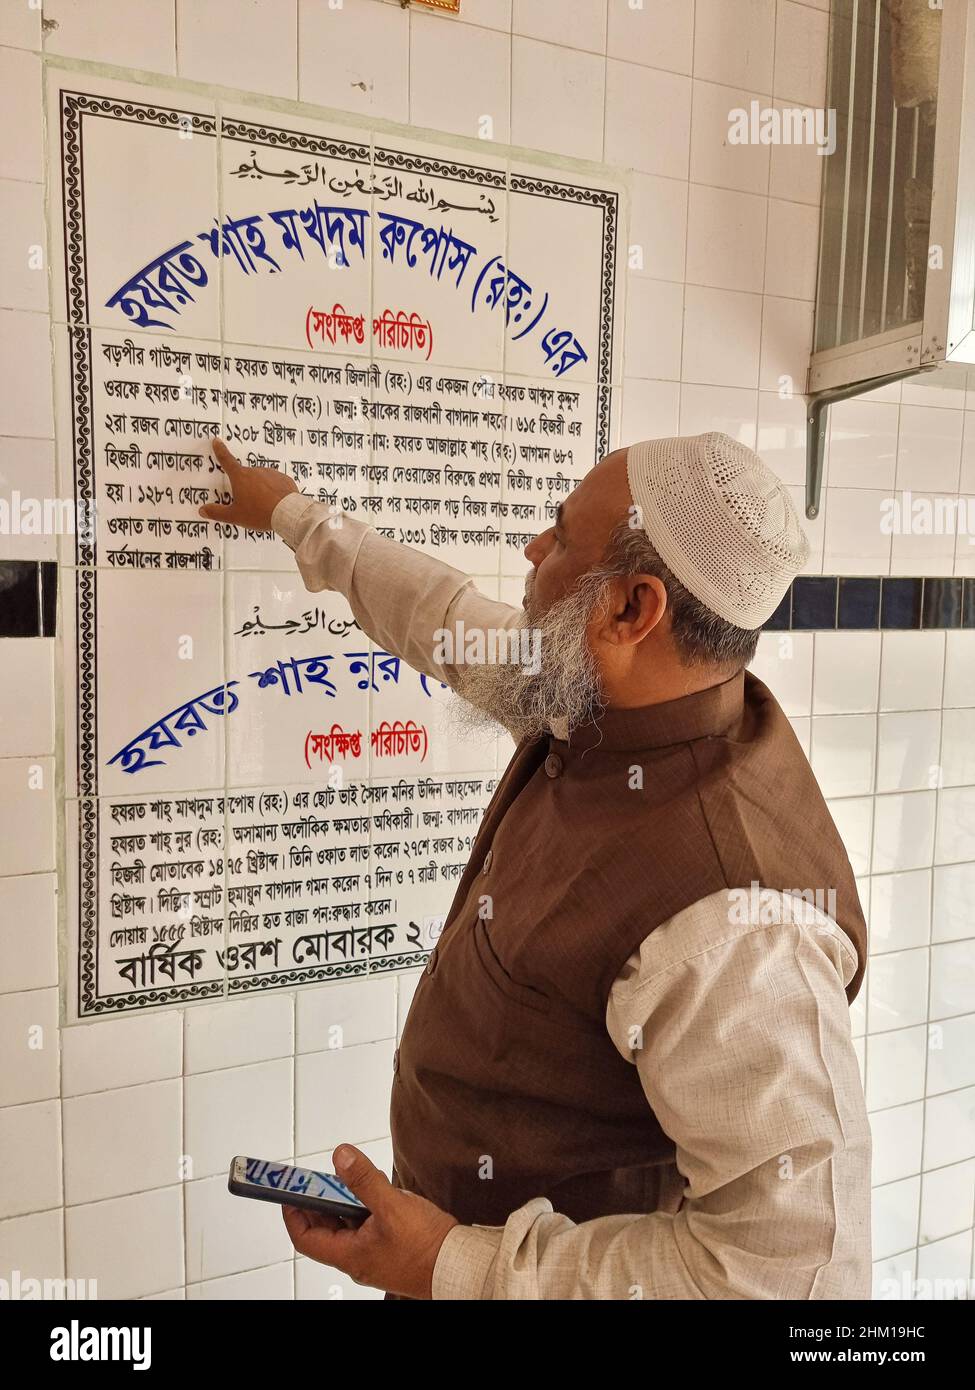 Current disciple of the Holy Saint, Shah Makhdum, traces the saint's genealogy on the chart fixed to the wall of the saint's mazaar (tomb), Rajshahi. ‘Abd al-Quddūs Jalāl ad-Dīn best known as Shah Makhdum and also known as Rupos, was a Sufi Muslim figure in Bangladesh. He is associated with the spread of Islam into the Varendra region of Bengal. He arrived in Bengal with his elder brother Syed Ahmad (Miran Shah) from Baghdad. Shah Makhdum Airport of Rajshahi, is named after him. Bangladesh. Stock Photo